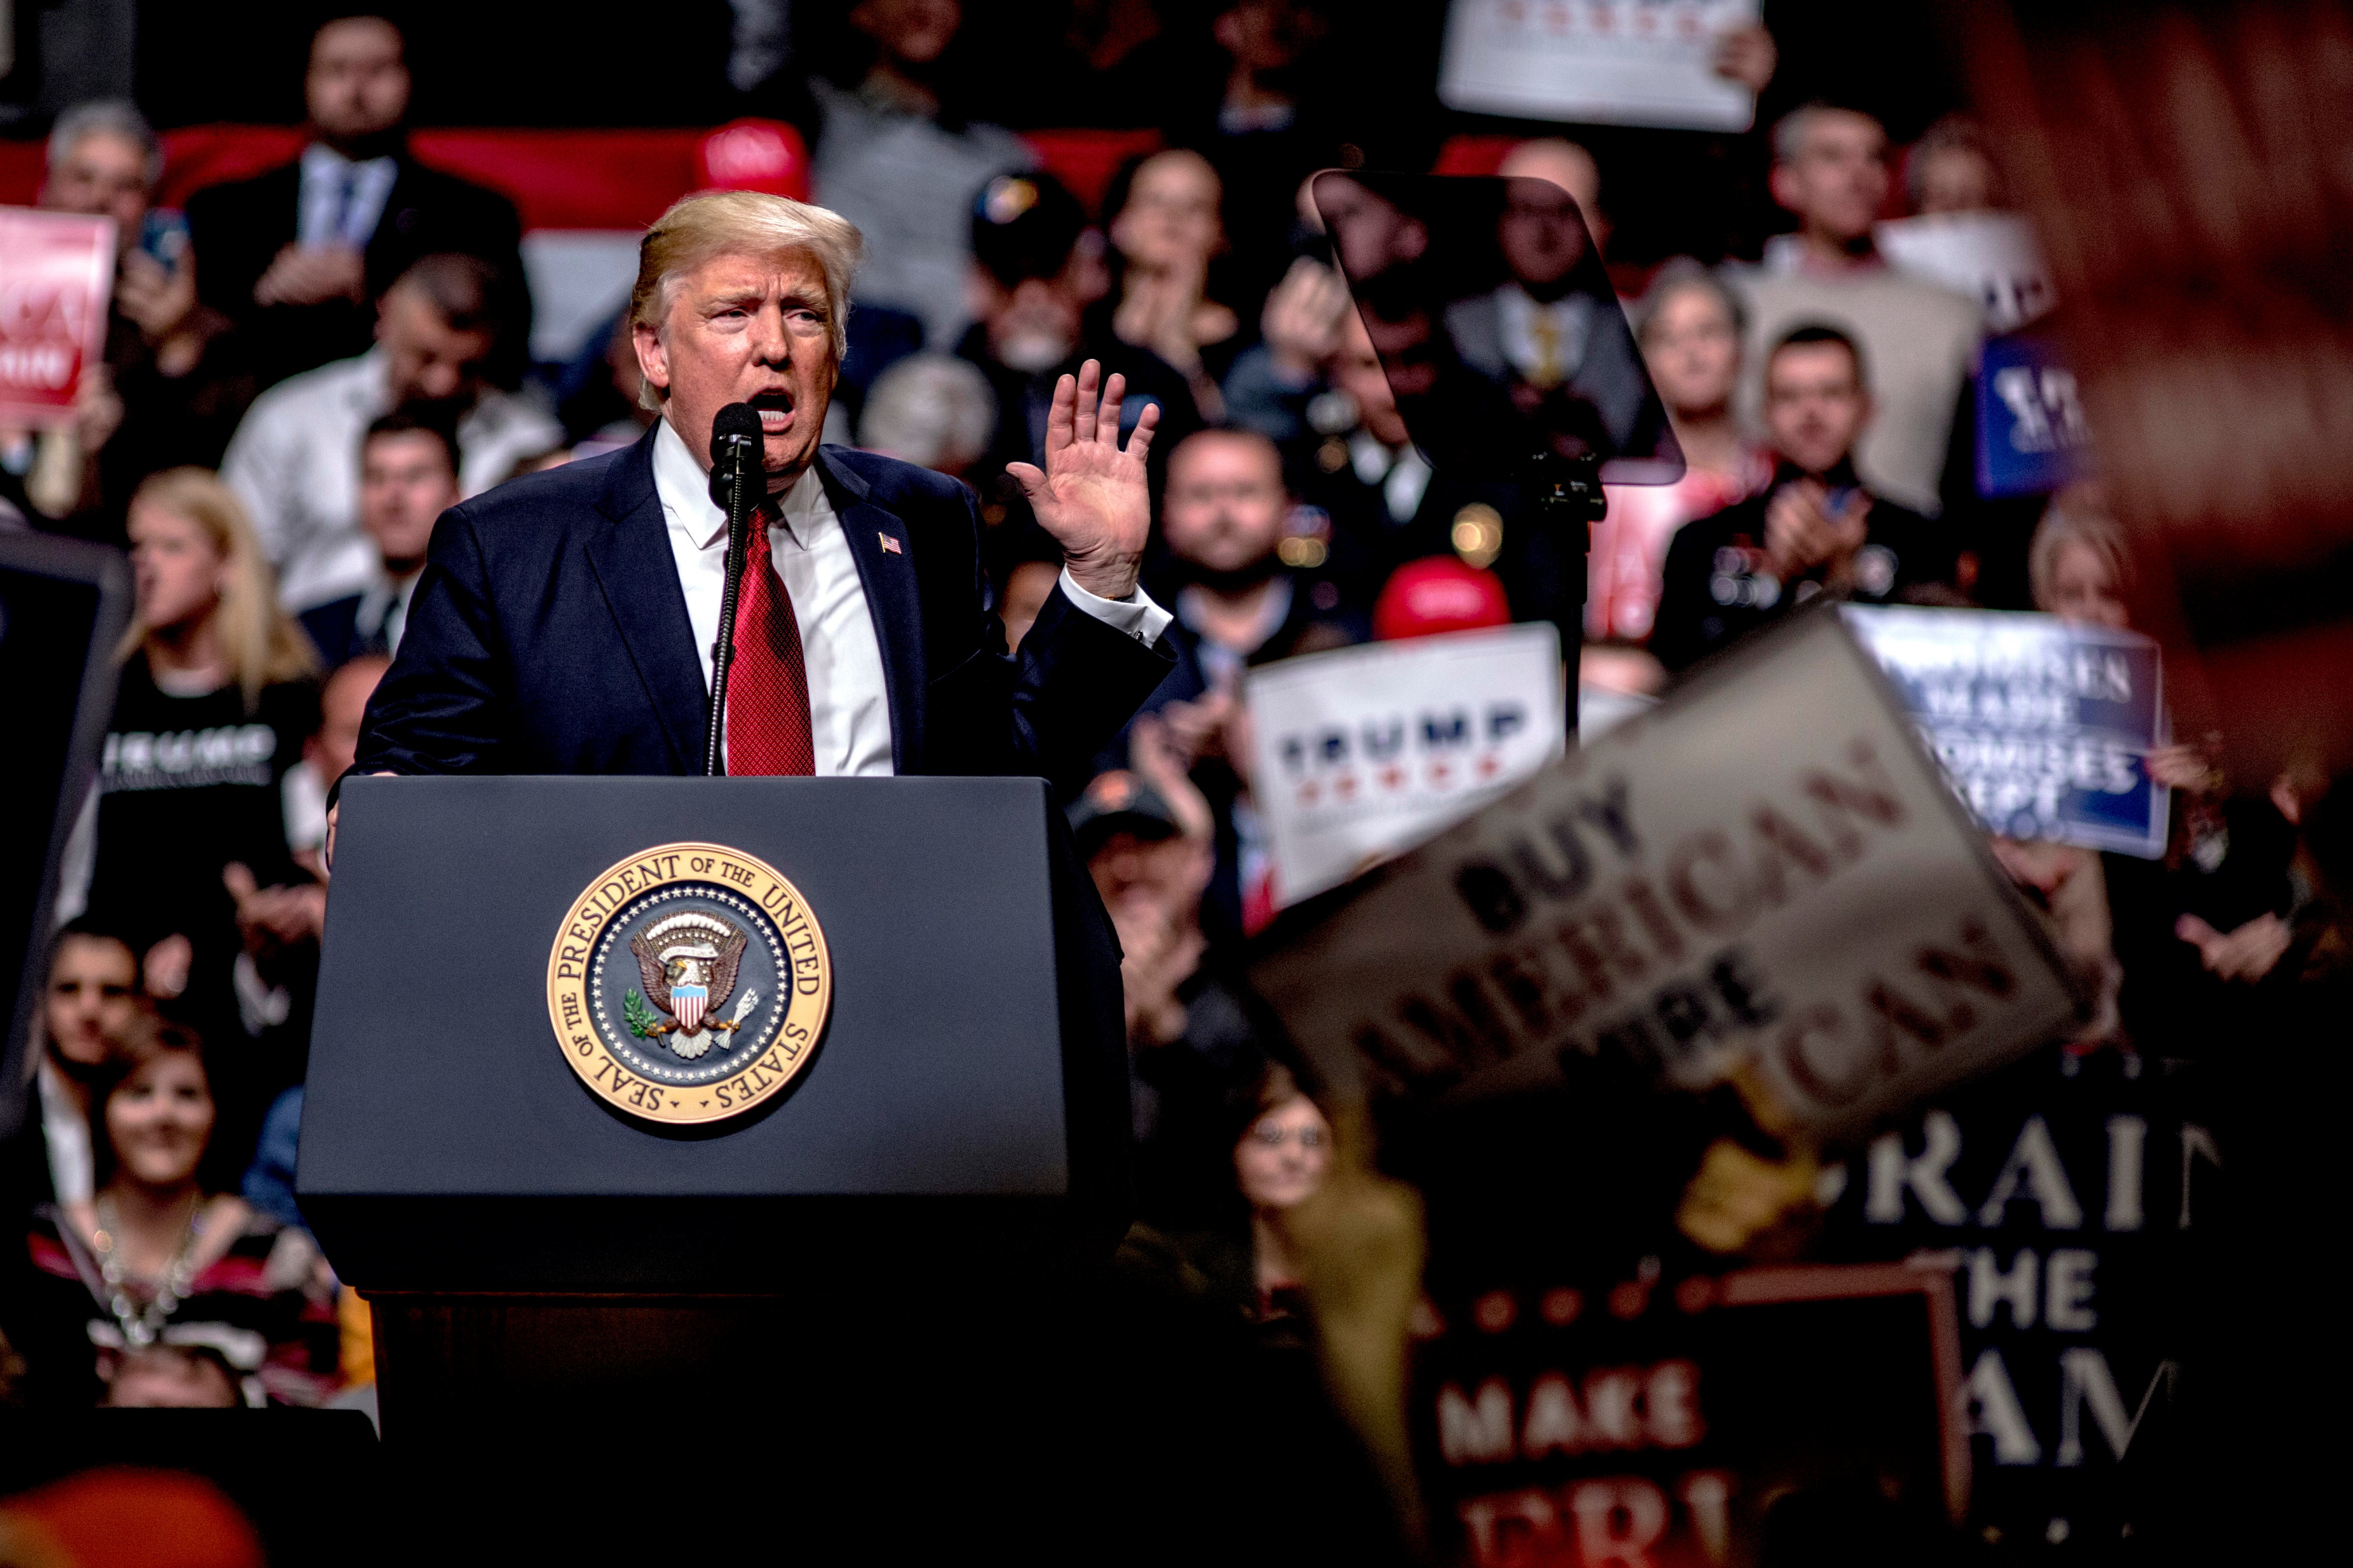 President Donald Trump speaks at a rally on March 15, 2017 in Nashville, Tennessee. During his speech Trump promised to repeal and replace Obamacare and also criticized the decision by a federal judge in Hawaii that halted the latest version of the travel ban. (Andrea Morales—Getty Images)